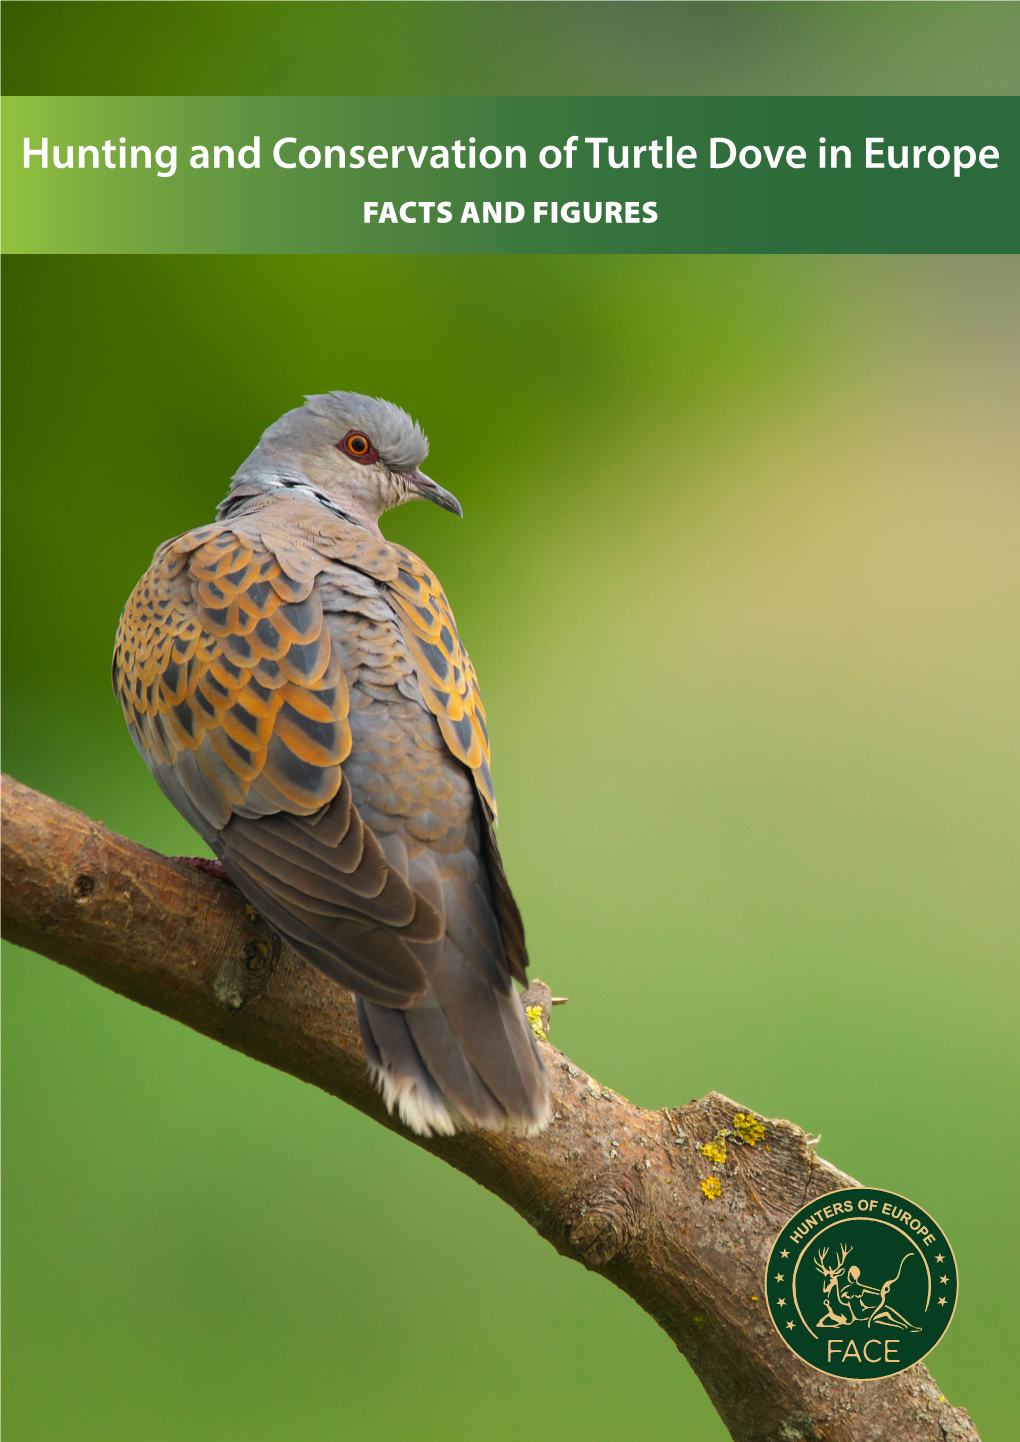 Hunting and Conservation of Turtle Dove in Europe FACTS and FIGURES What’S Happening with the Turtle Dove Population in Europe?